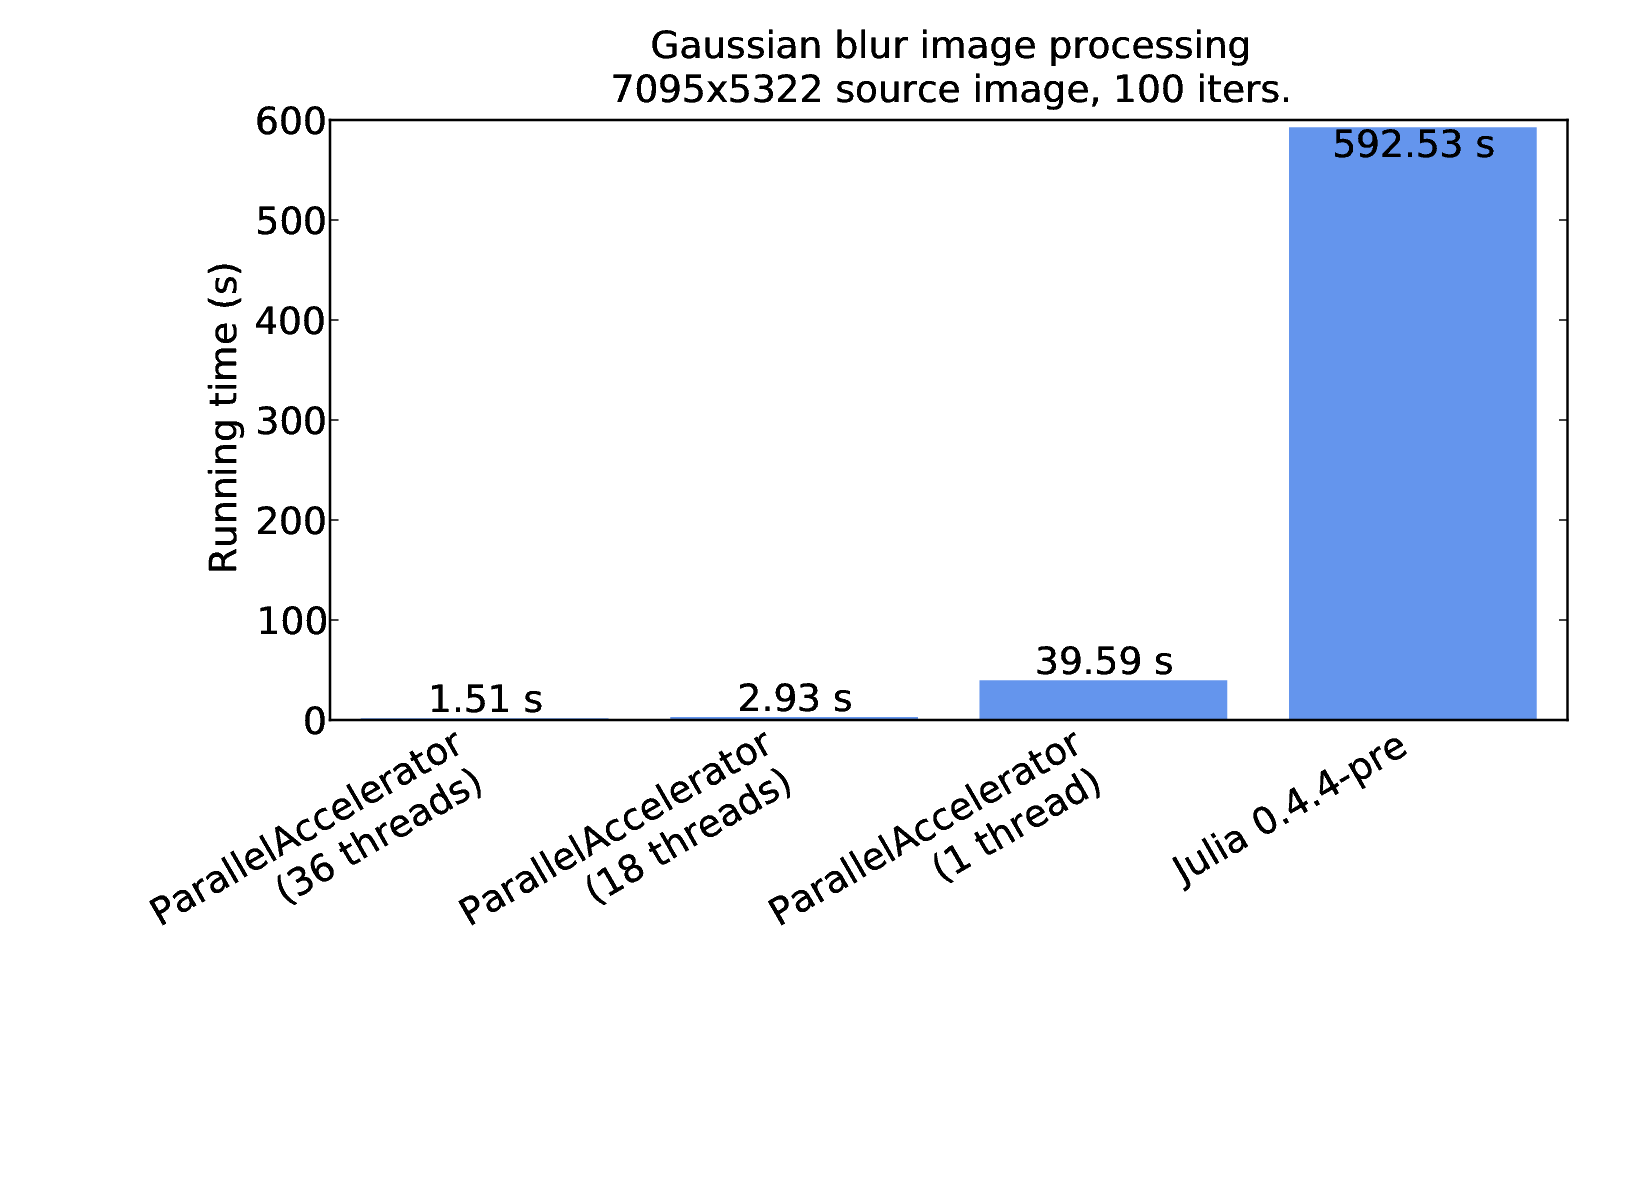 Benchmark results for plain Julia and ParallelAccelerator implementations of Gaussian blur